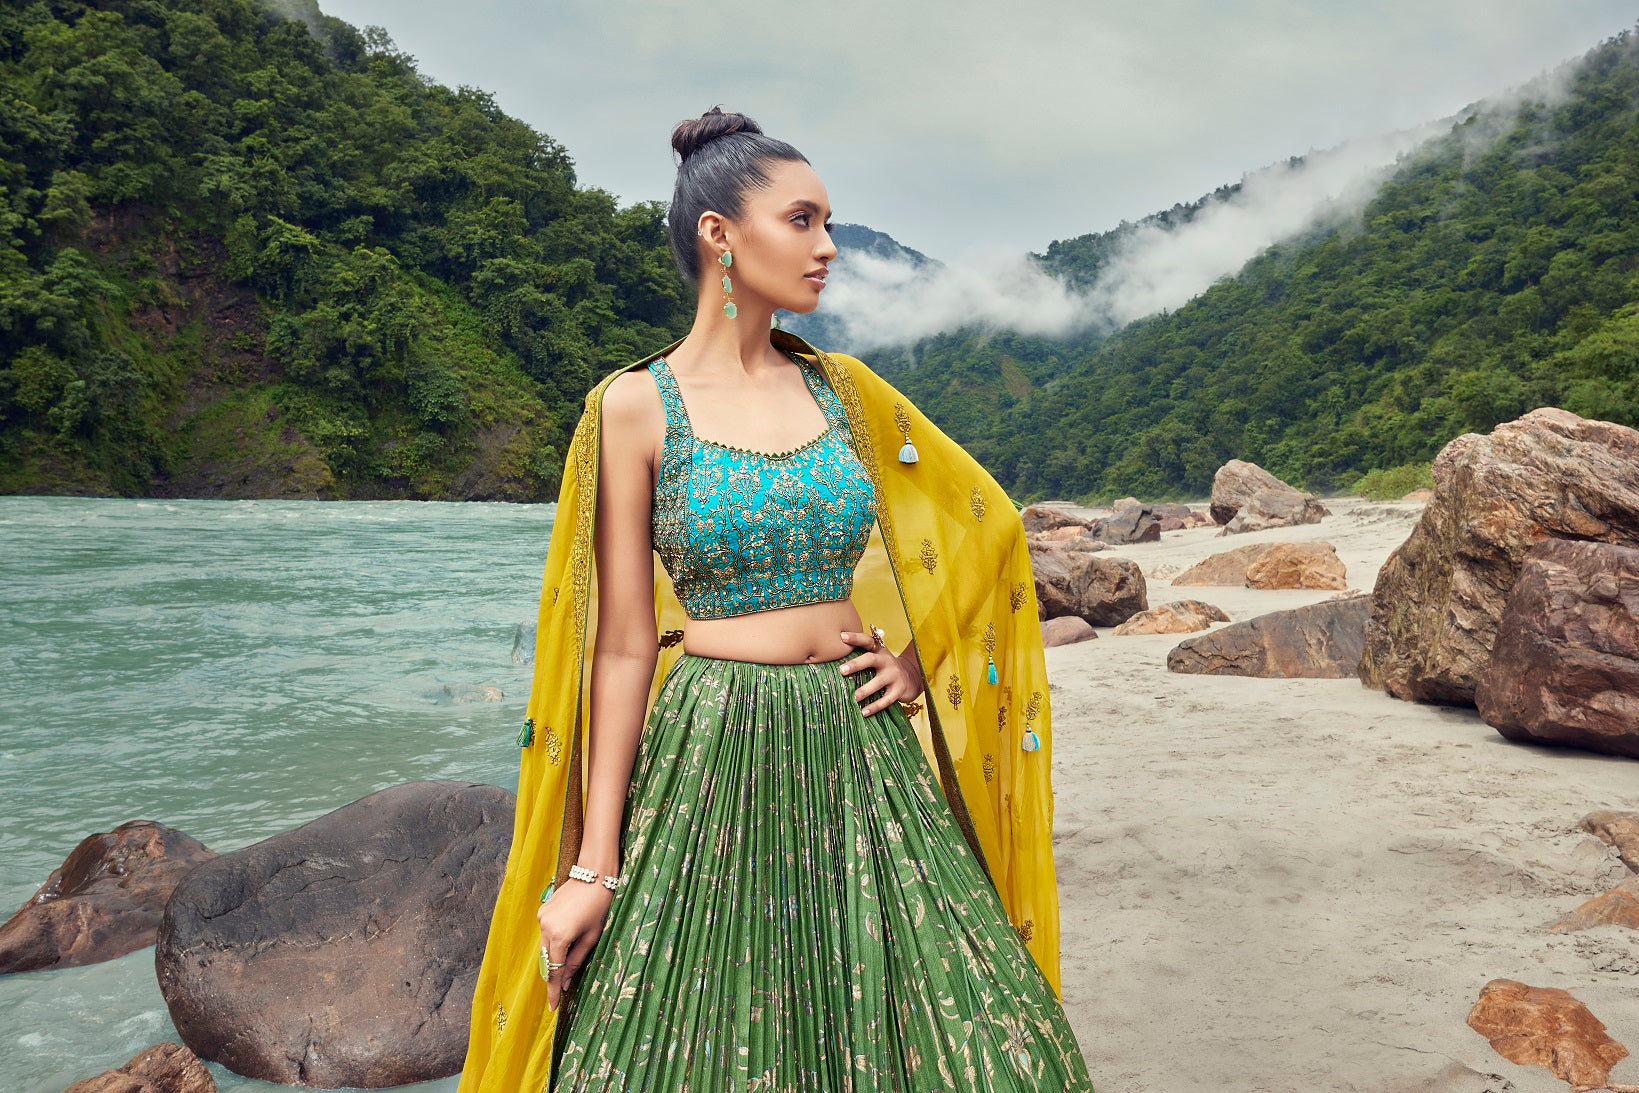 Shop this beautiful green blue lehenga with an embellished yellow dupatta. The lehenga is perfect for haldi and sangeet parties. It is crafted with intricate embroidery work. Shop online from Pure Elegance.